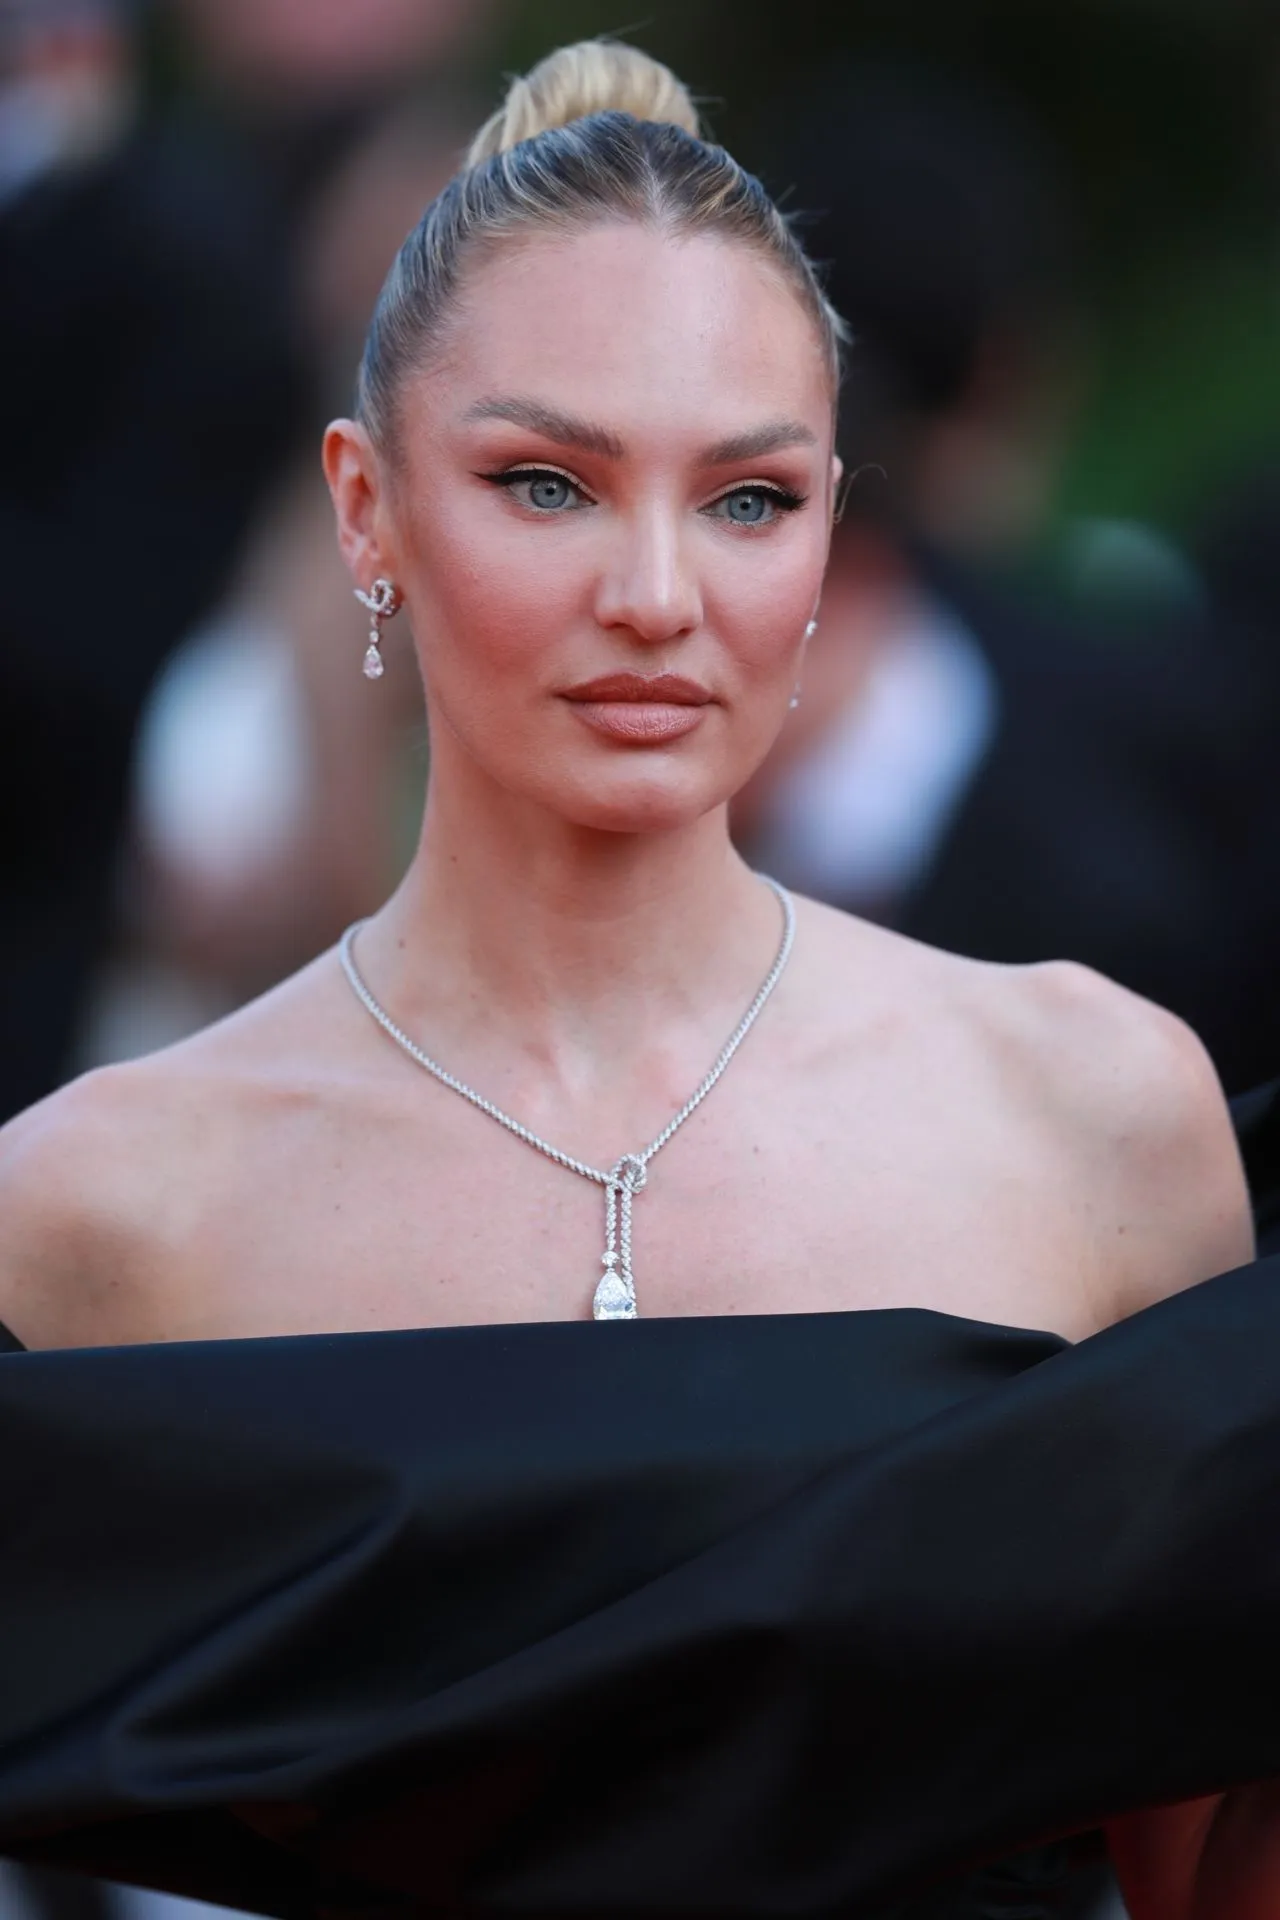 CANDICE SWANEPOEL AT HORIZON RED CARPET THE CANNES FESTIVAL3